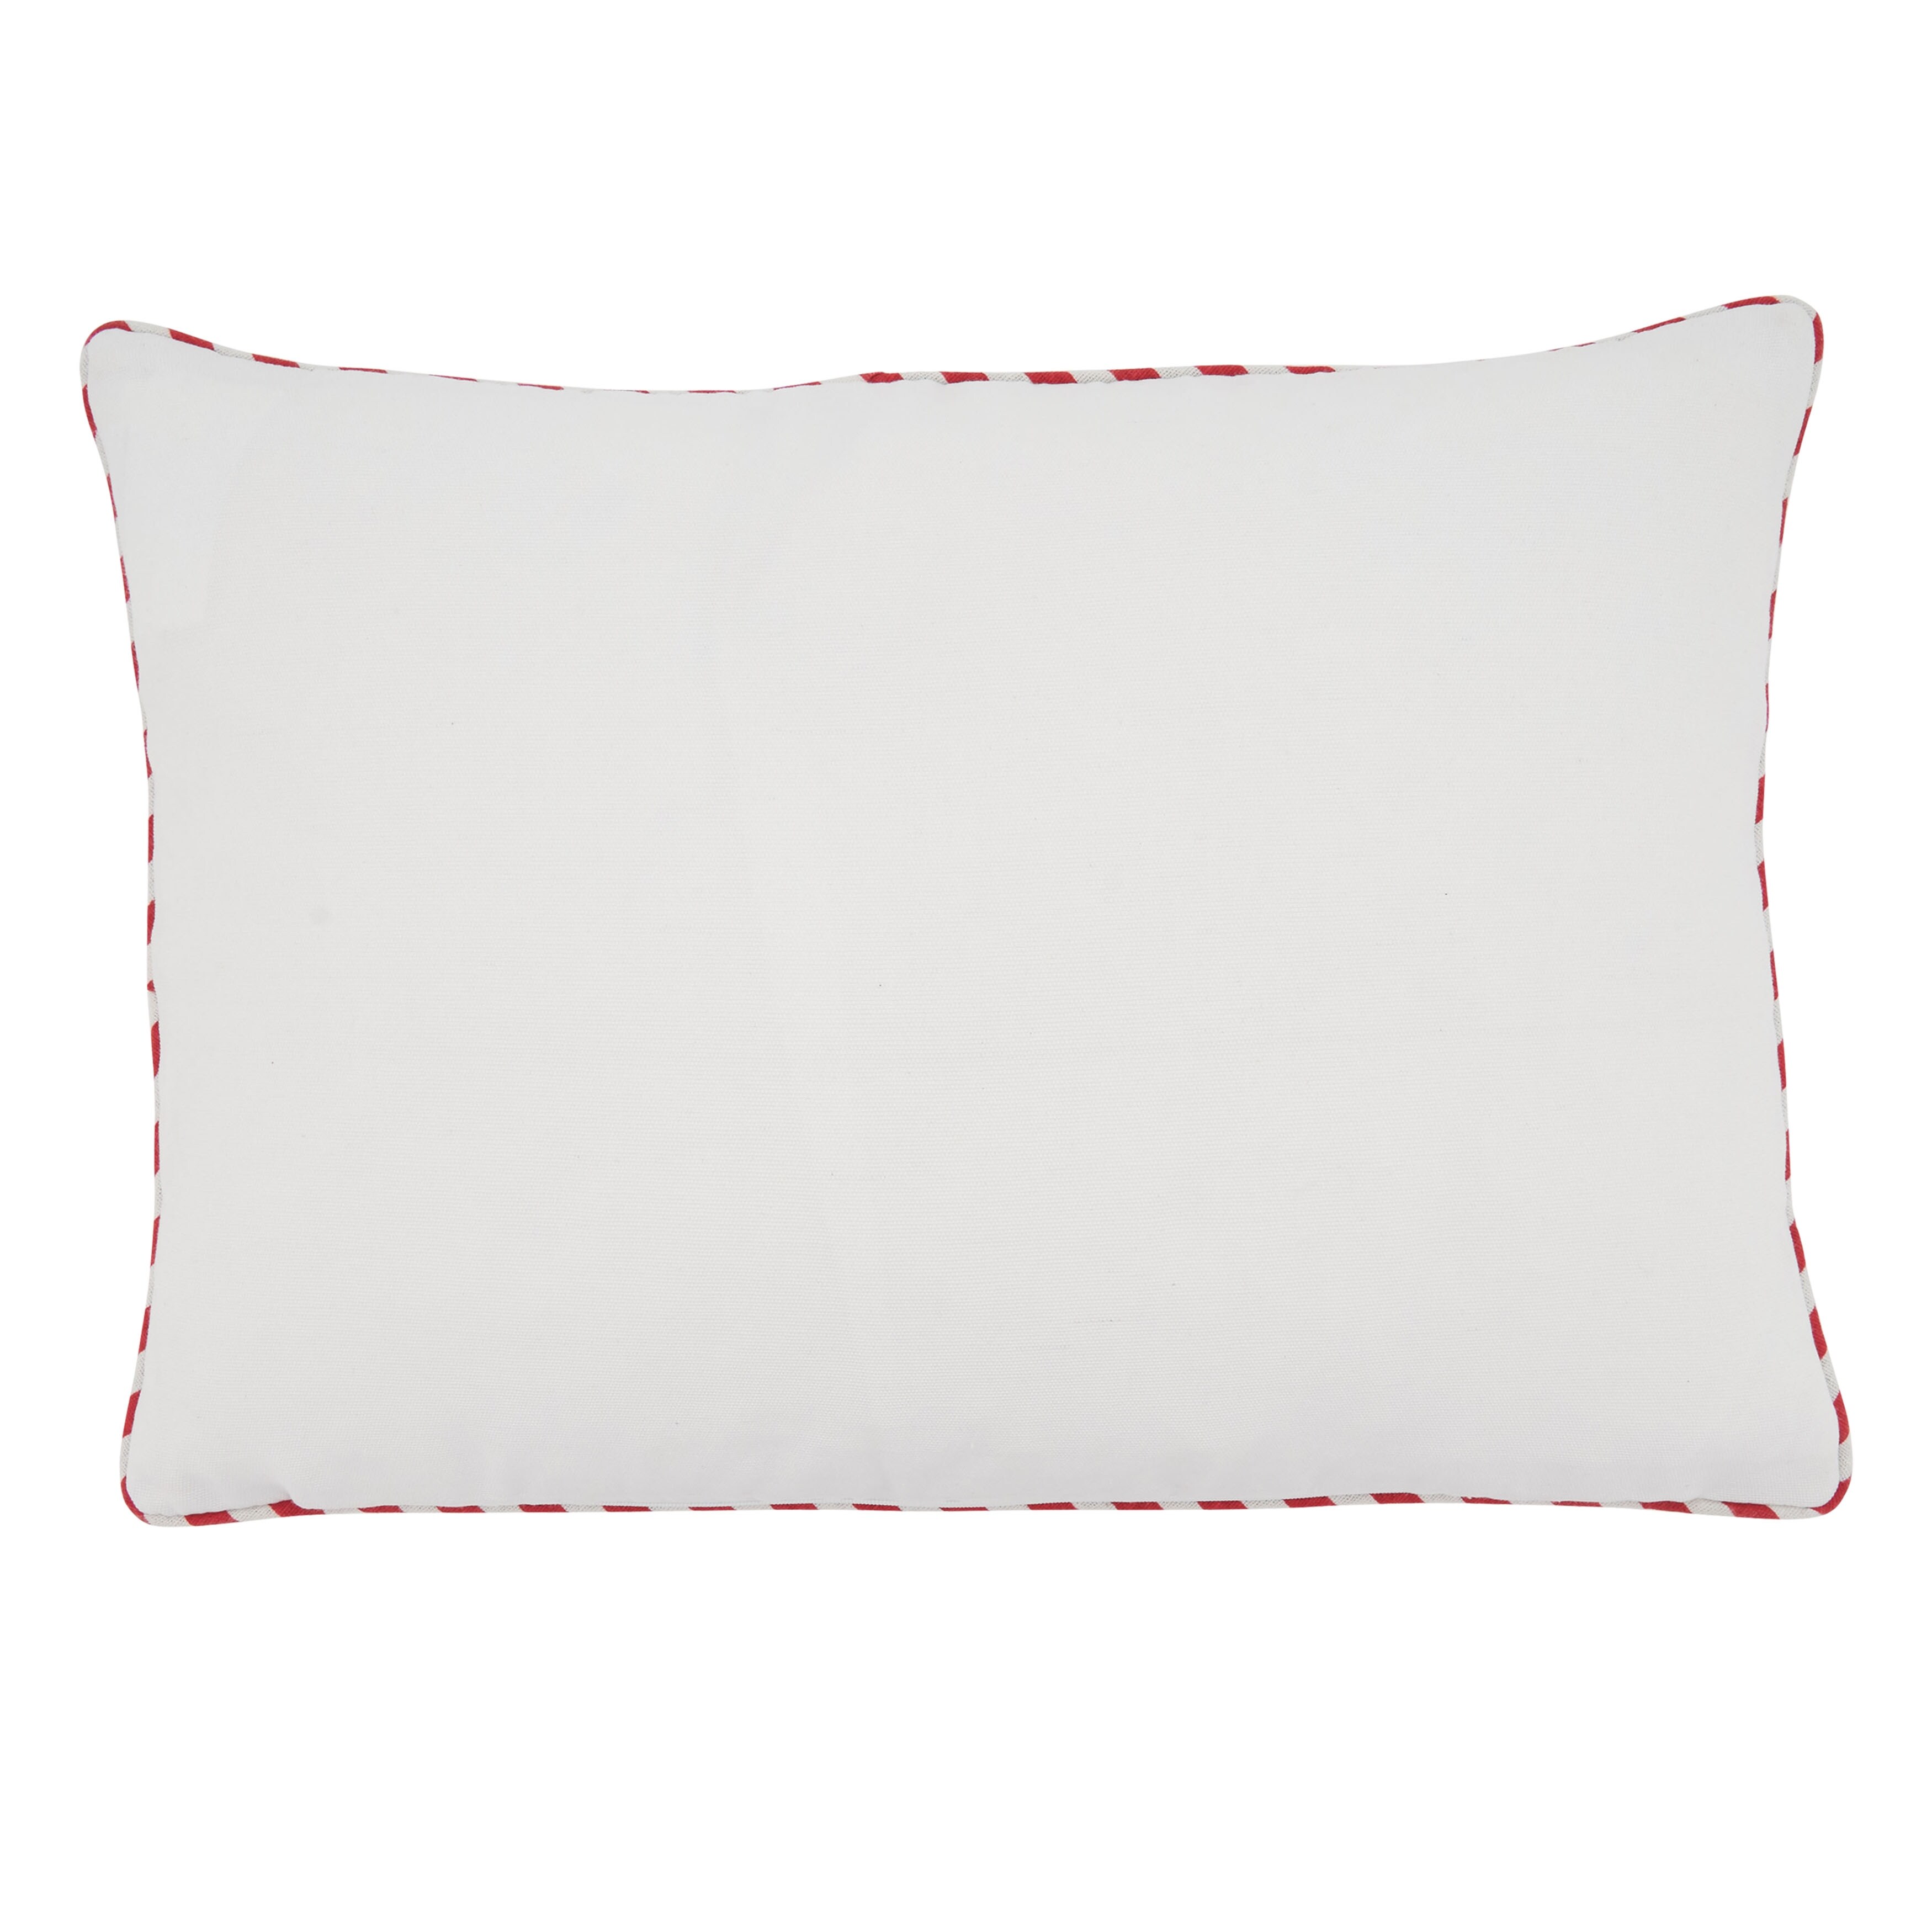 Throw Pillow With Merry Christmas Design - Cover Only